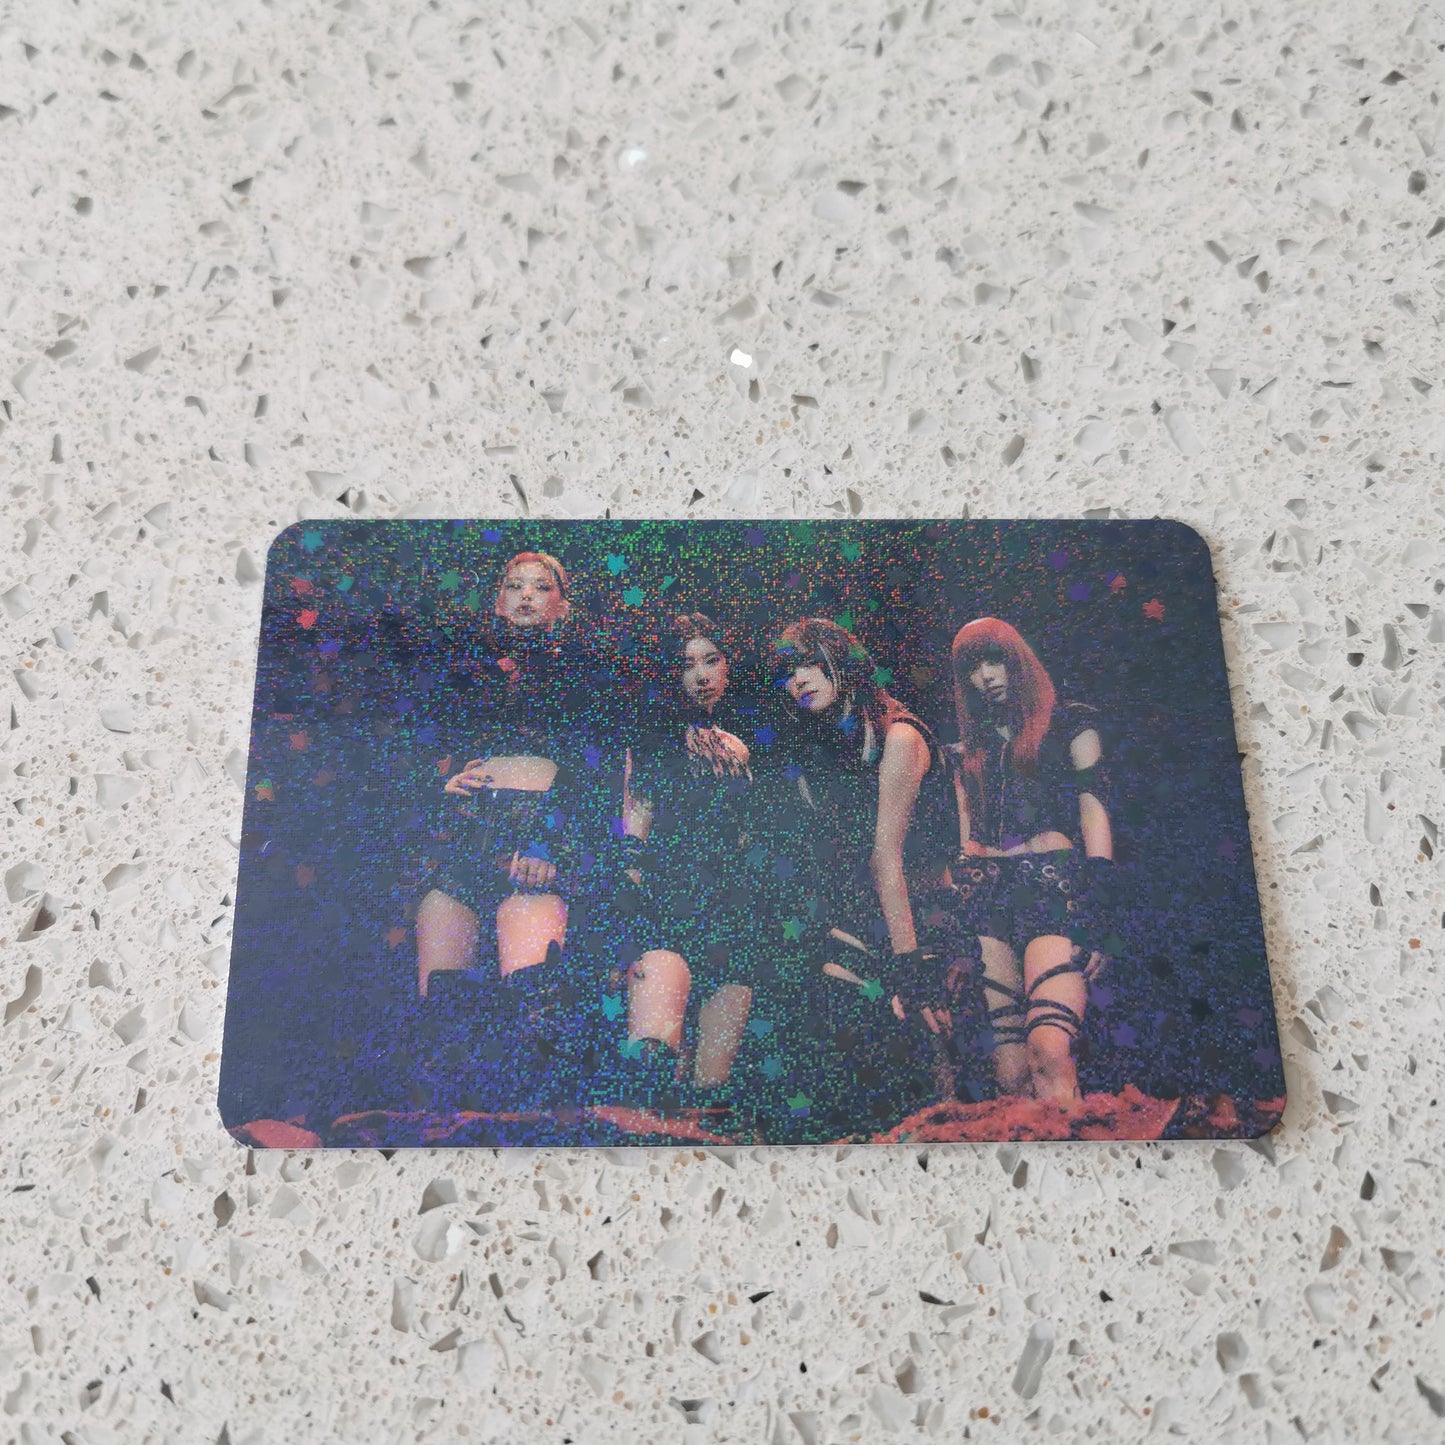 ITZY - BORN TO BE MUSIC KOREA HOLOGRAPHIC PHOTOCARDS